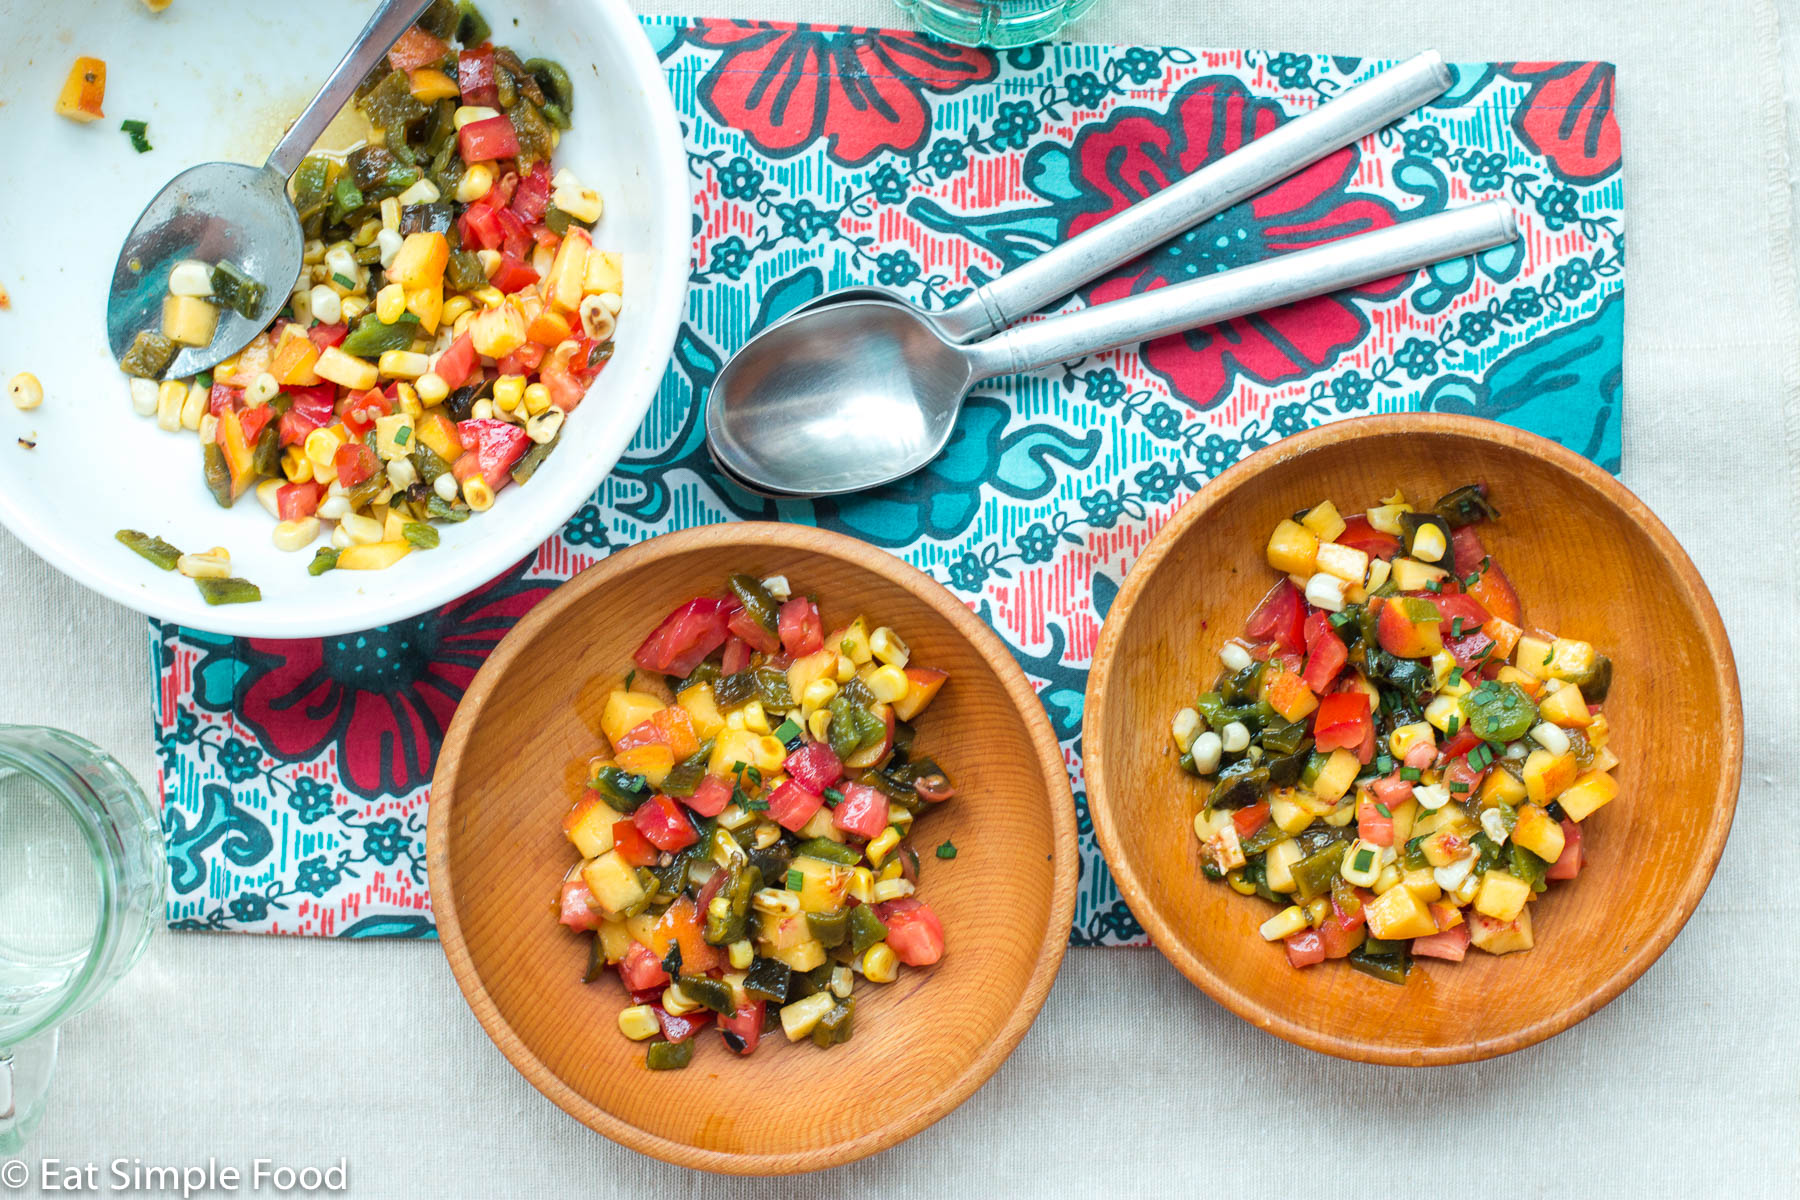 2 wood bowls and one larger white bowl of chunks of peaches, tomato, and corn salsa. Spoons on the side.